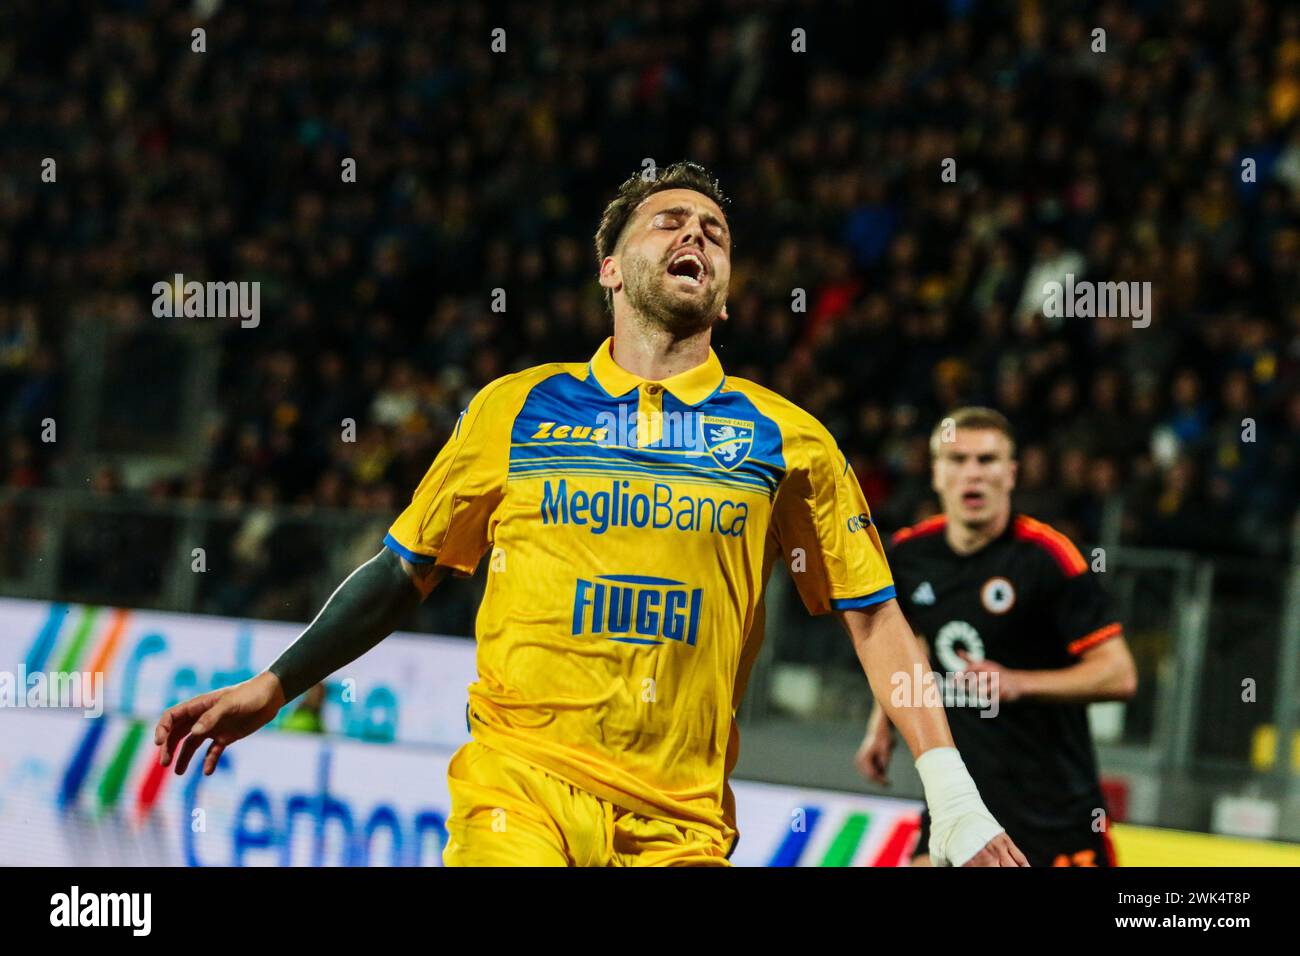 Frosinone, Italy. 18th Feb, 2024. Francesco Gelli of Frosinone Calcio during Frosinone Calcio vs AS Roma, Italian soccer Serie A match in Frosinone, Italy, February 18 2024 Credit: Independent Photo Agency/Alamy Live News Stock Photo